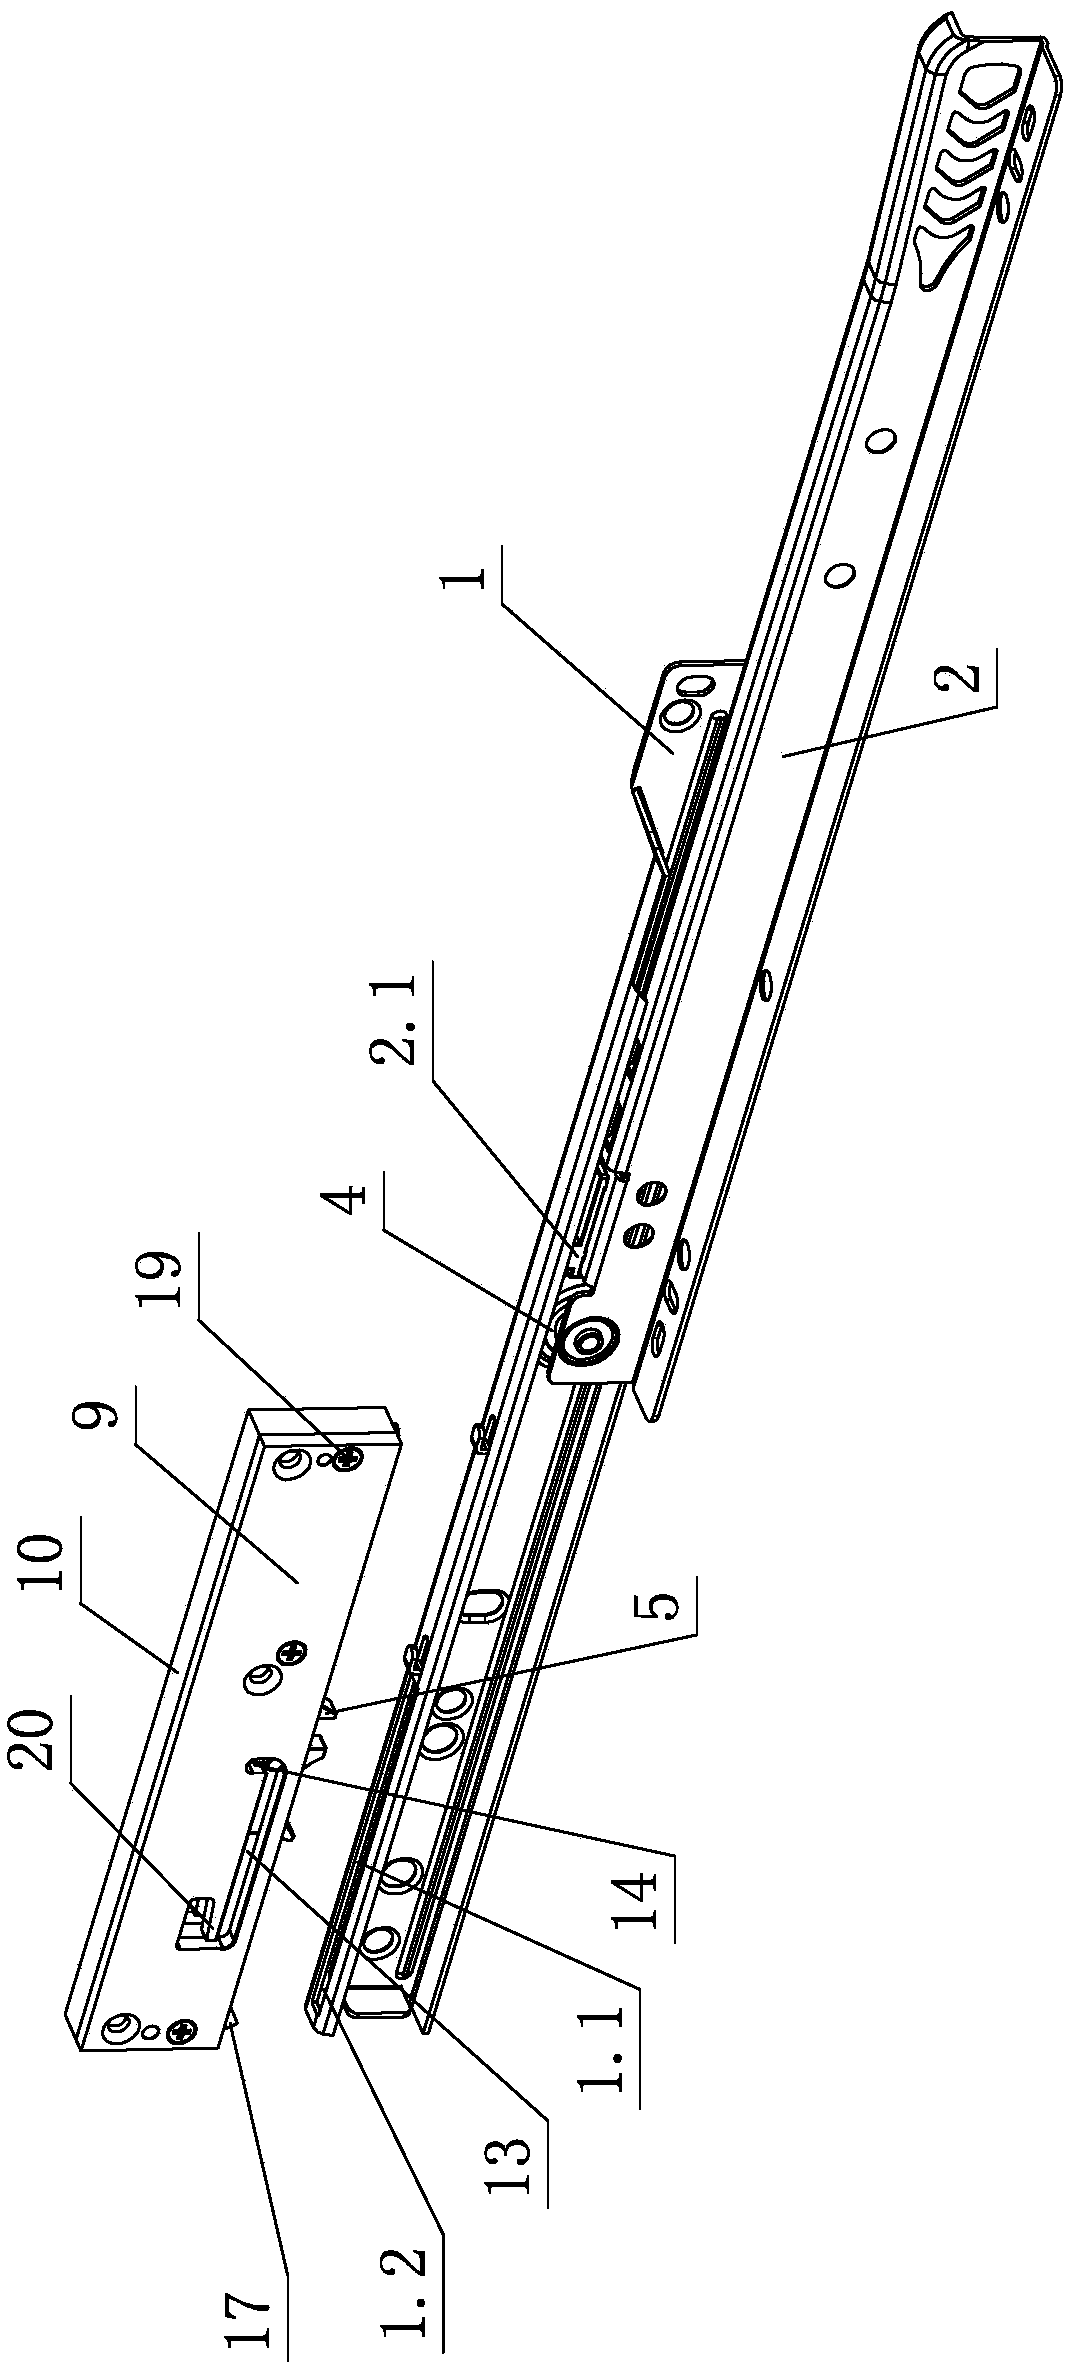 A damping buffer structure for a drawer slide rail